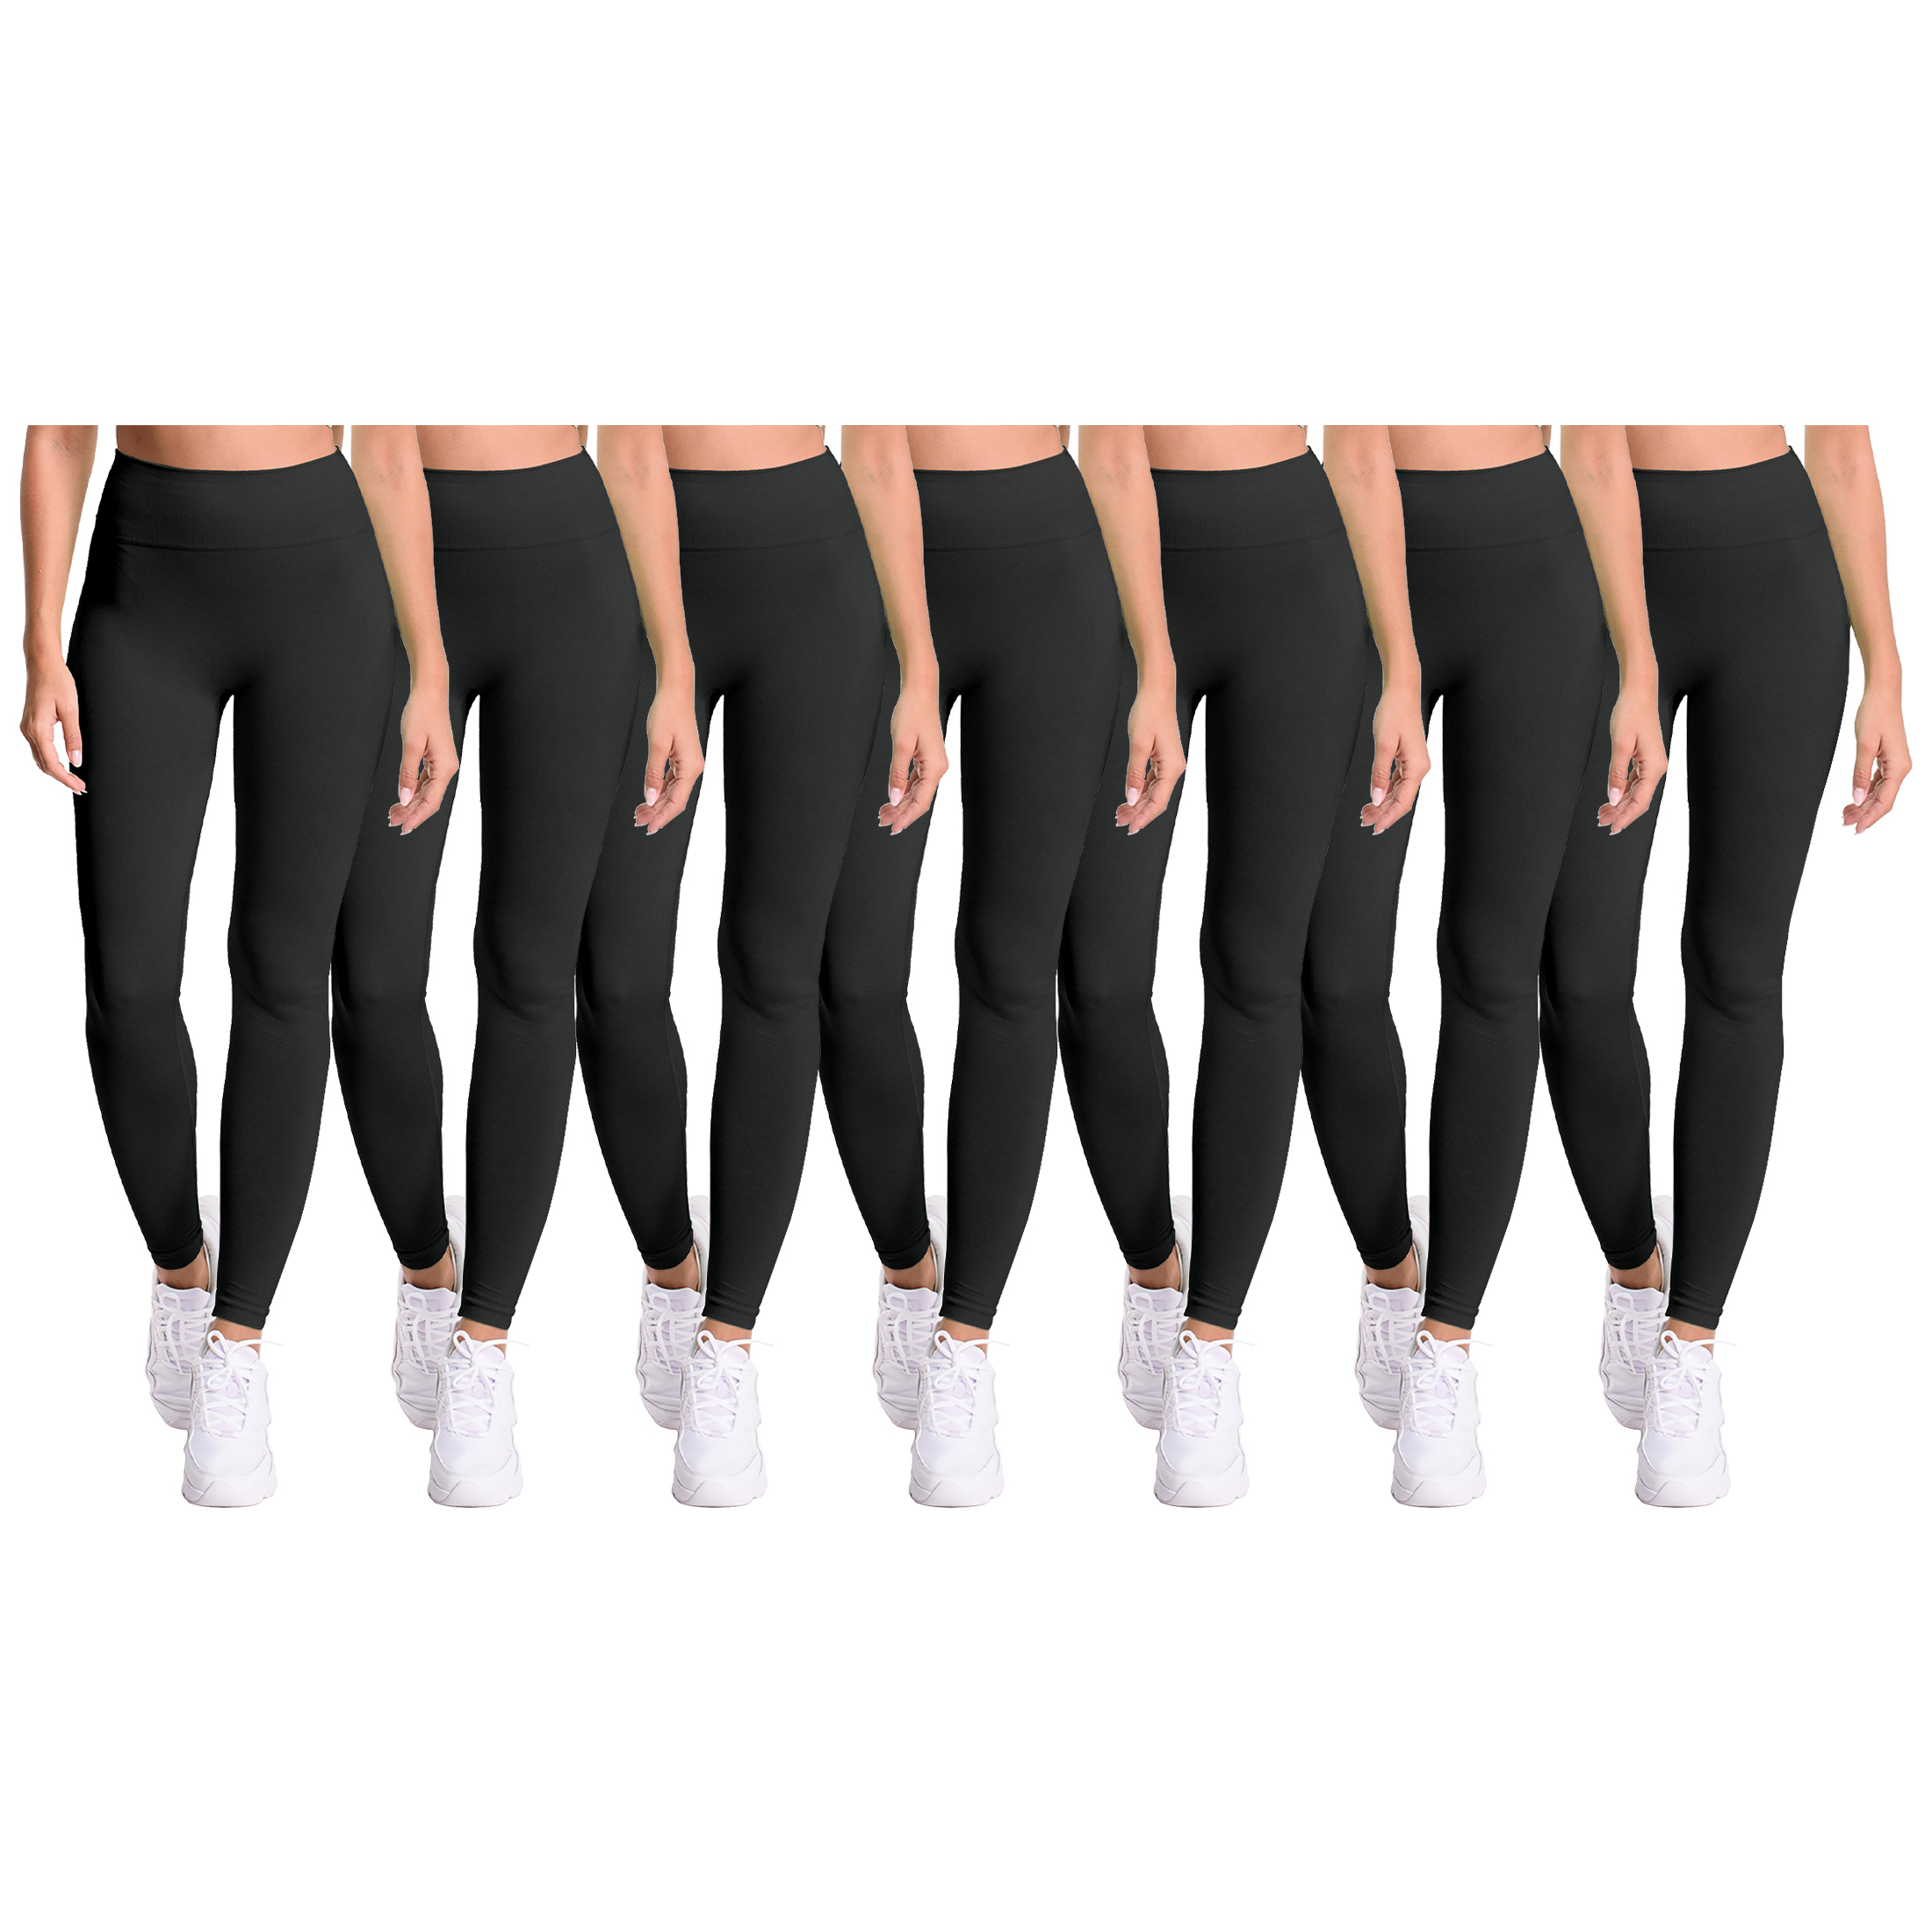 6-Pack: Women's Cozy Fleece-Lined Workout Yoga Pants Seamless Leggings - Assorted, X-Large